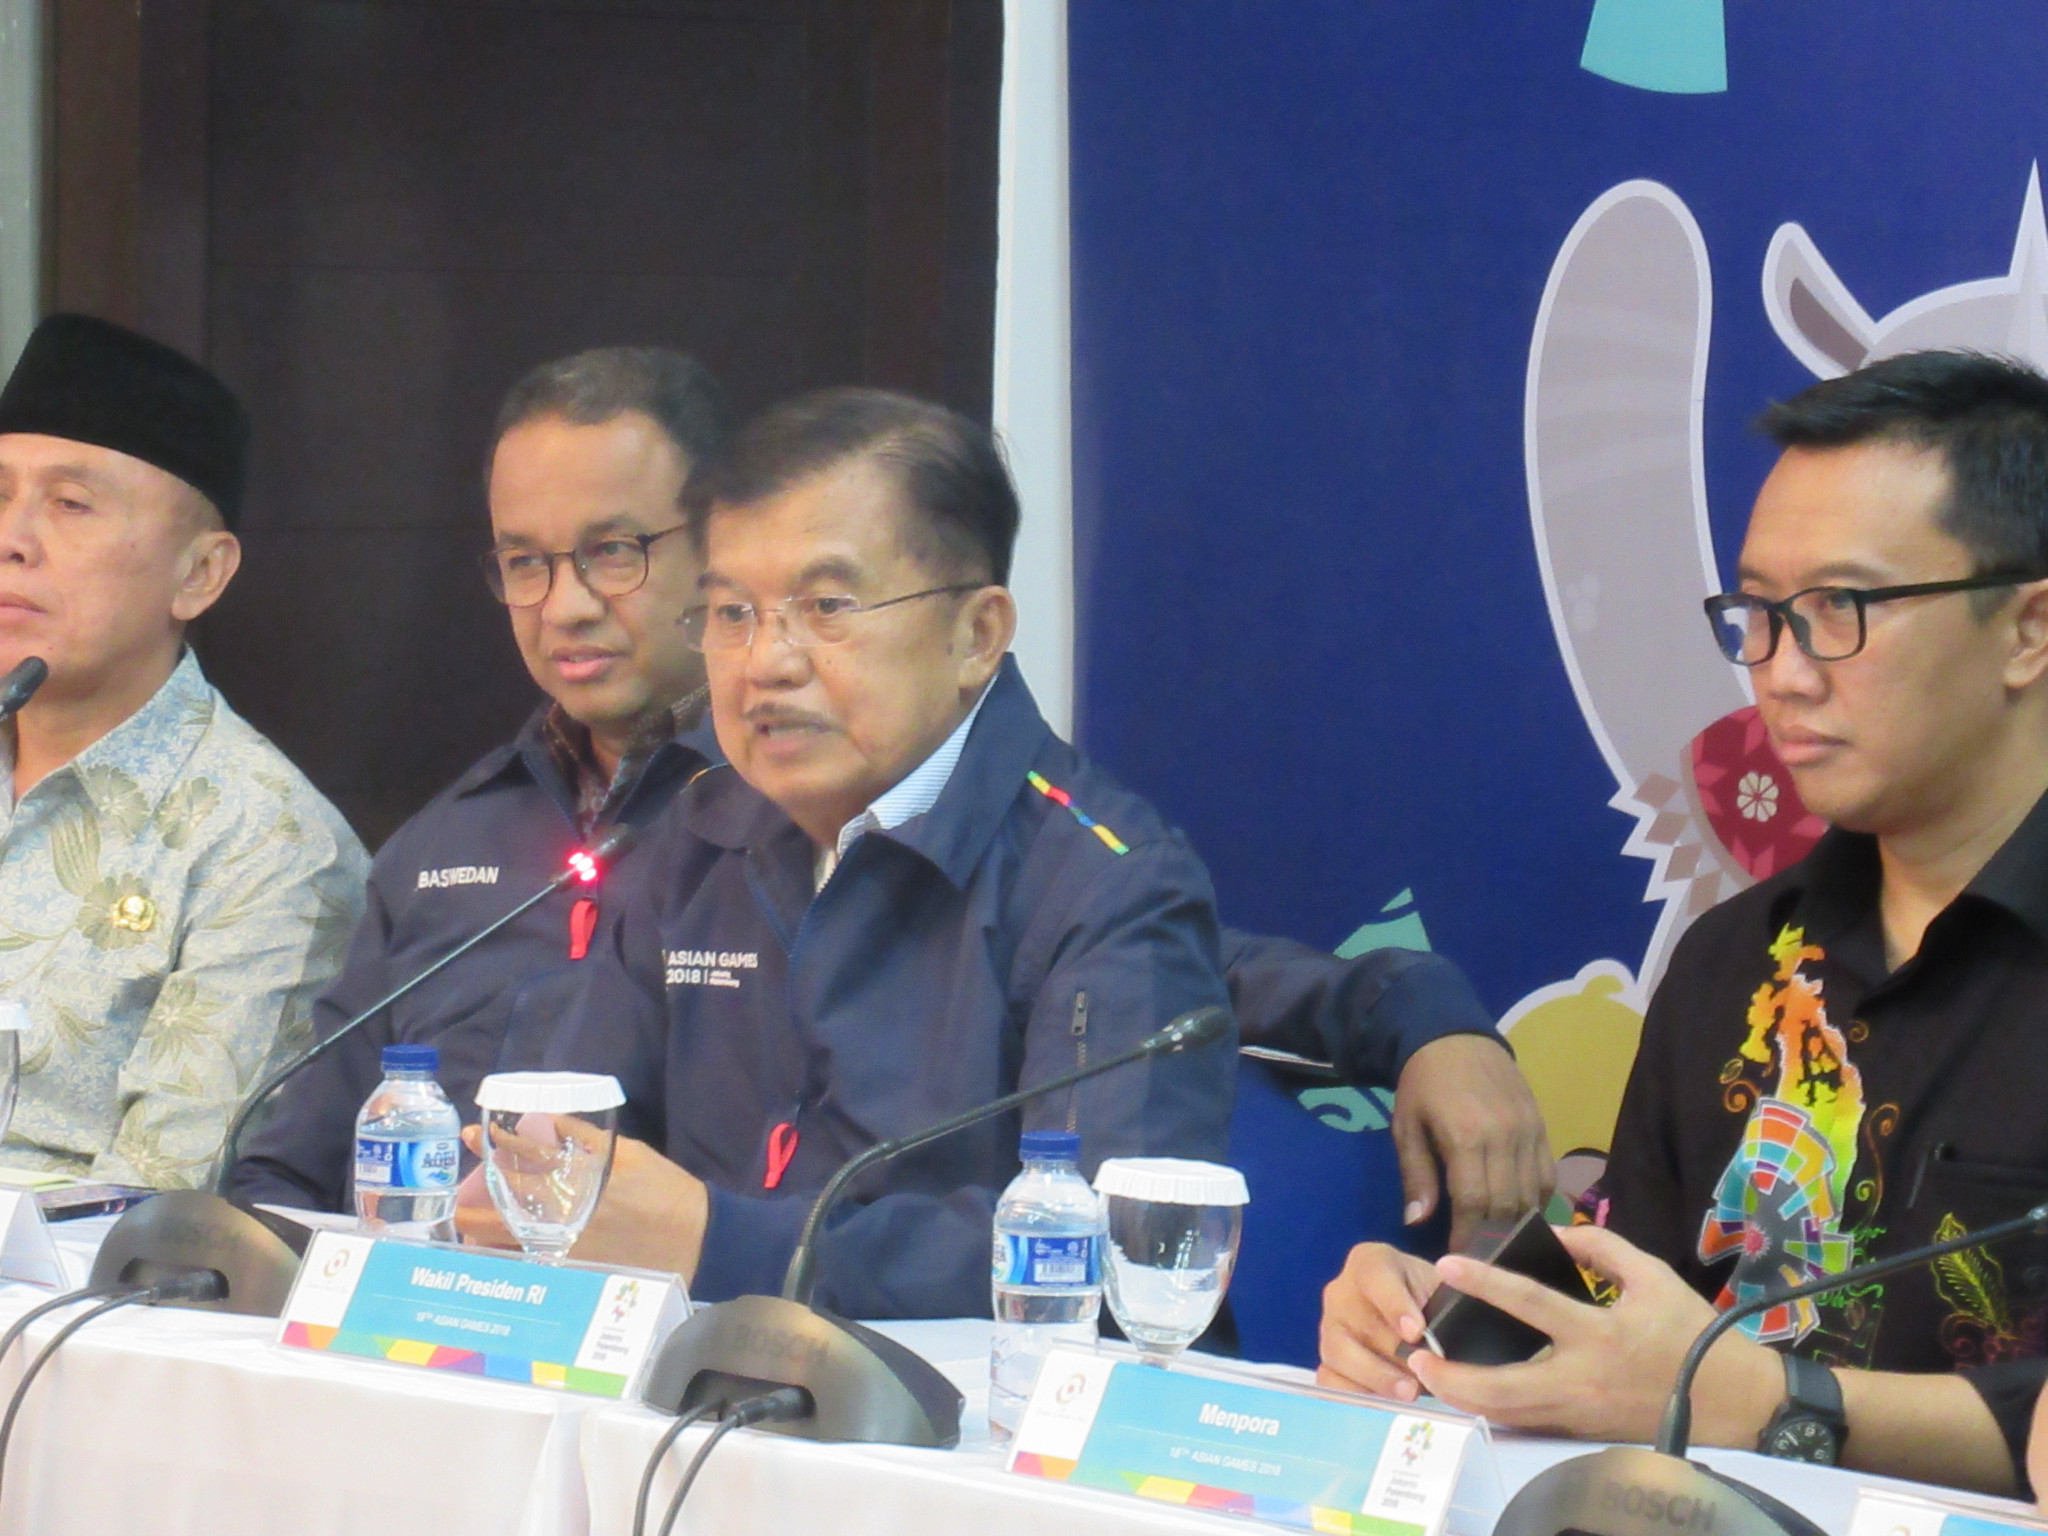 Indonesia's vice-president Jusuf Kalla, second from right, has said the venues for the Asian Games this August must be finished by July 20 ©OCA